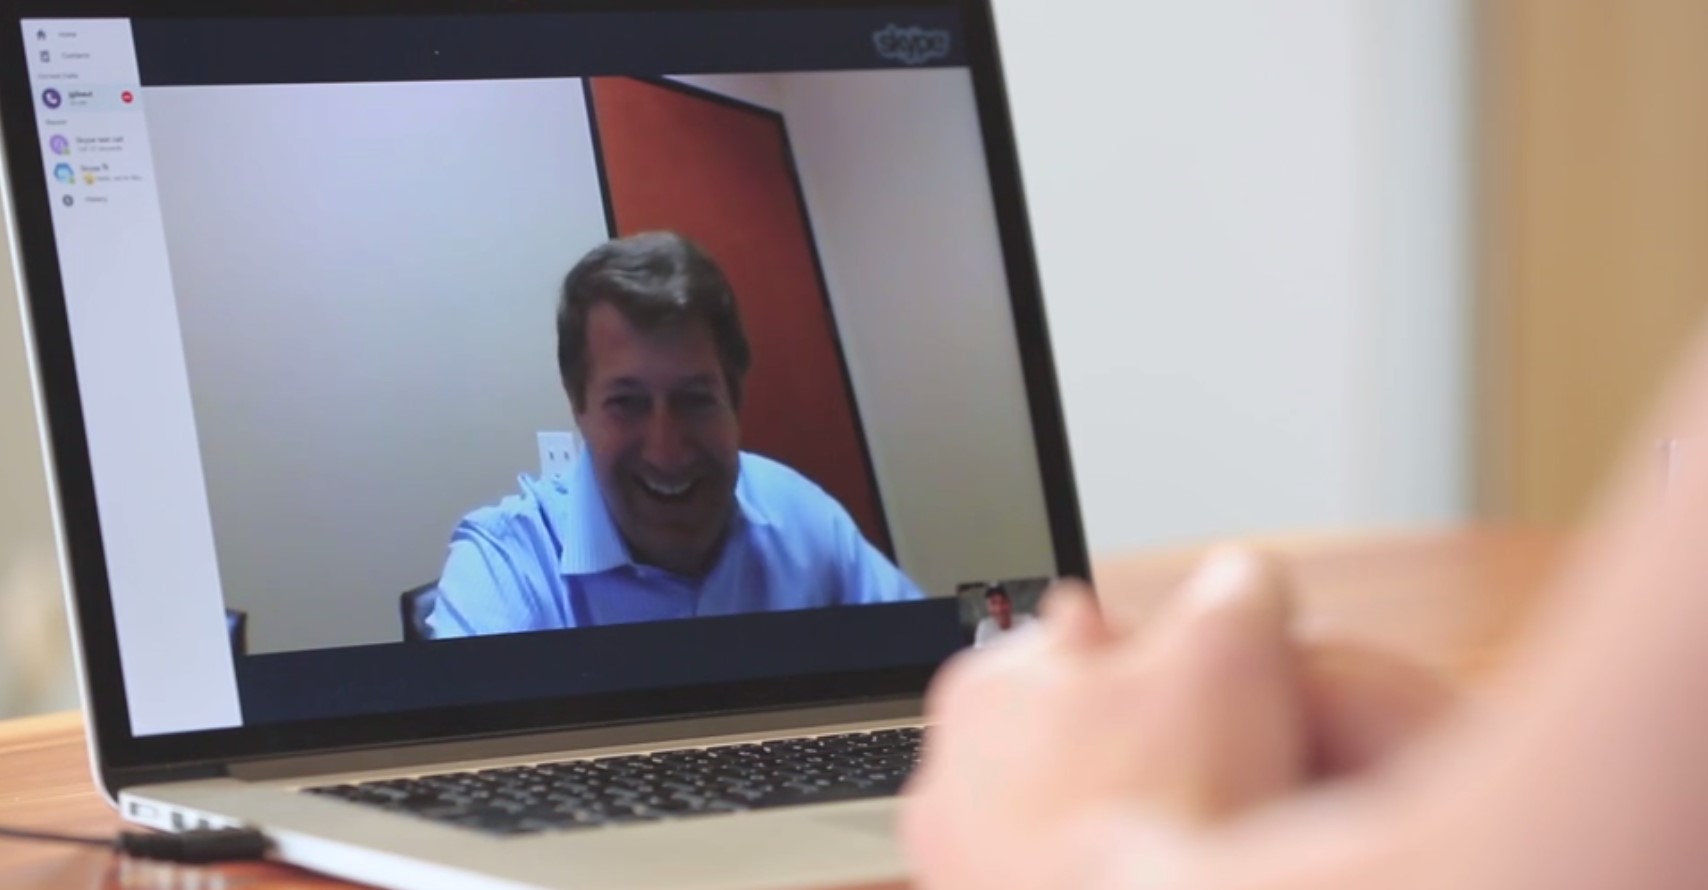 Branch Manager Dan Peterson reacts in surprise when ambushed via Skype by CEO Casey Crawford.